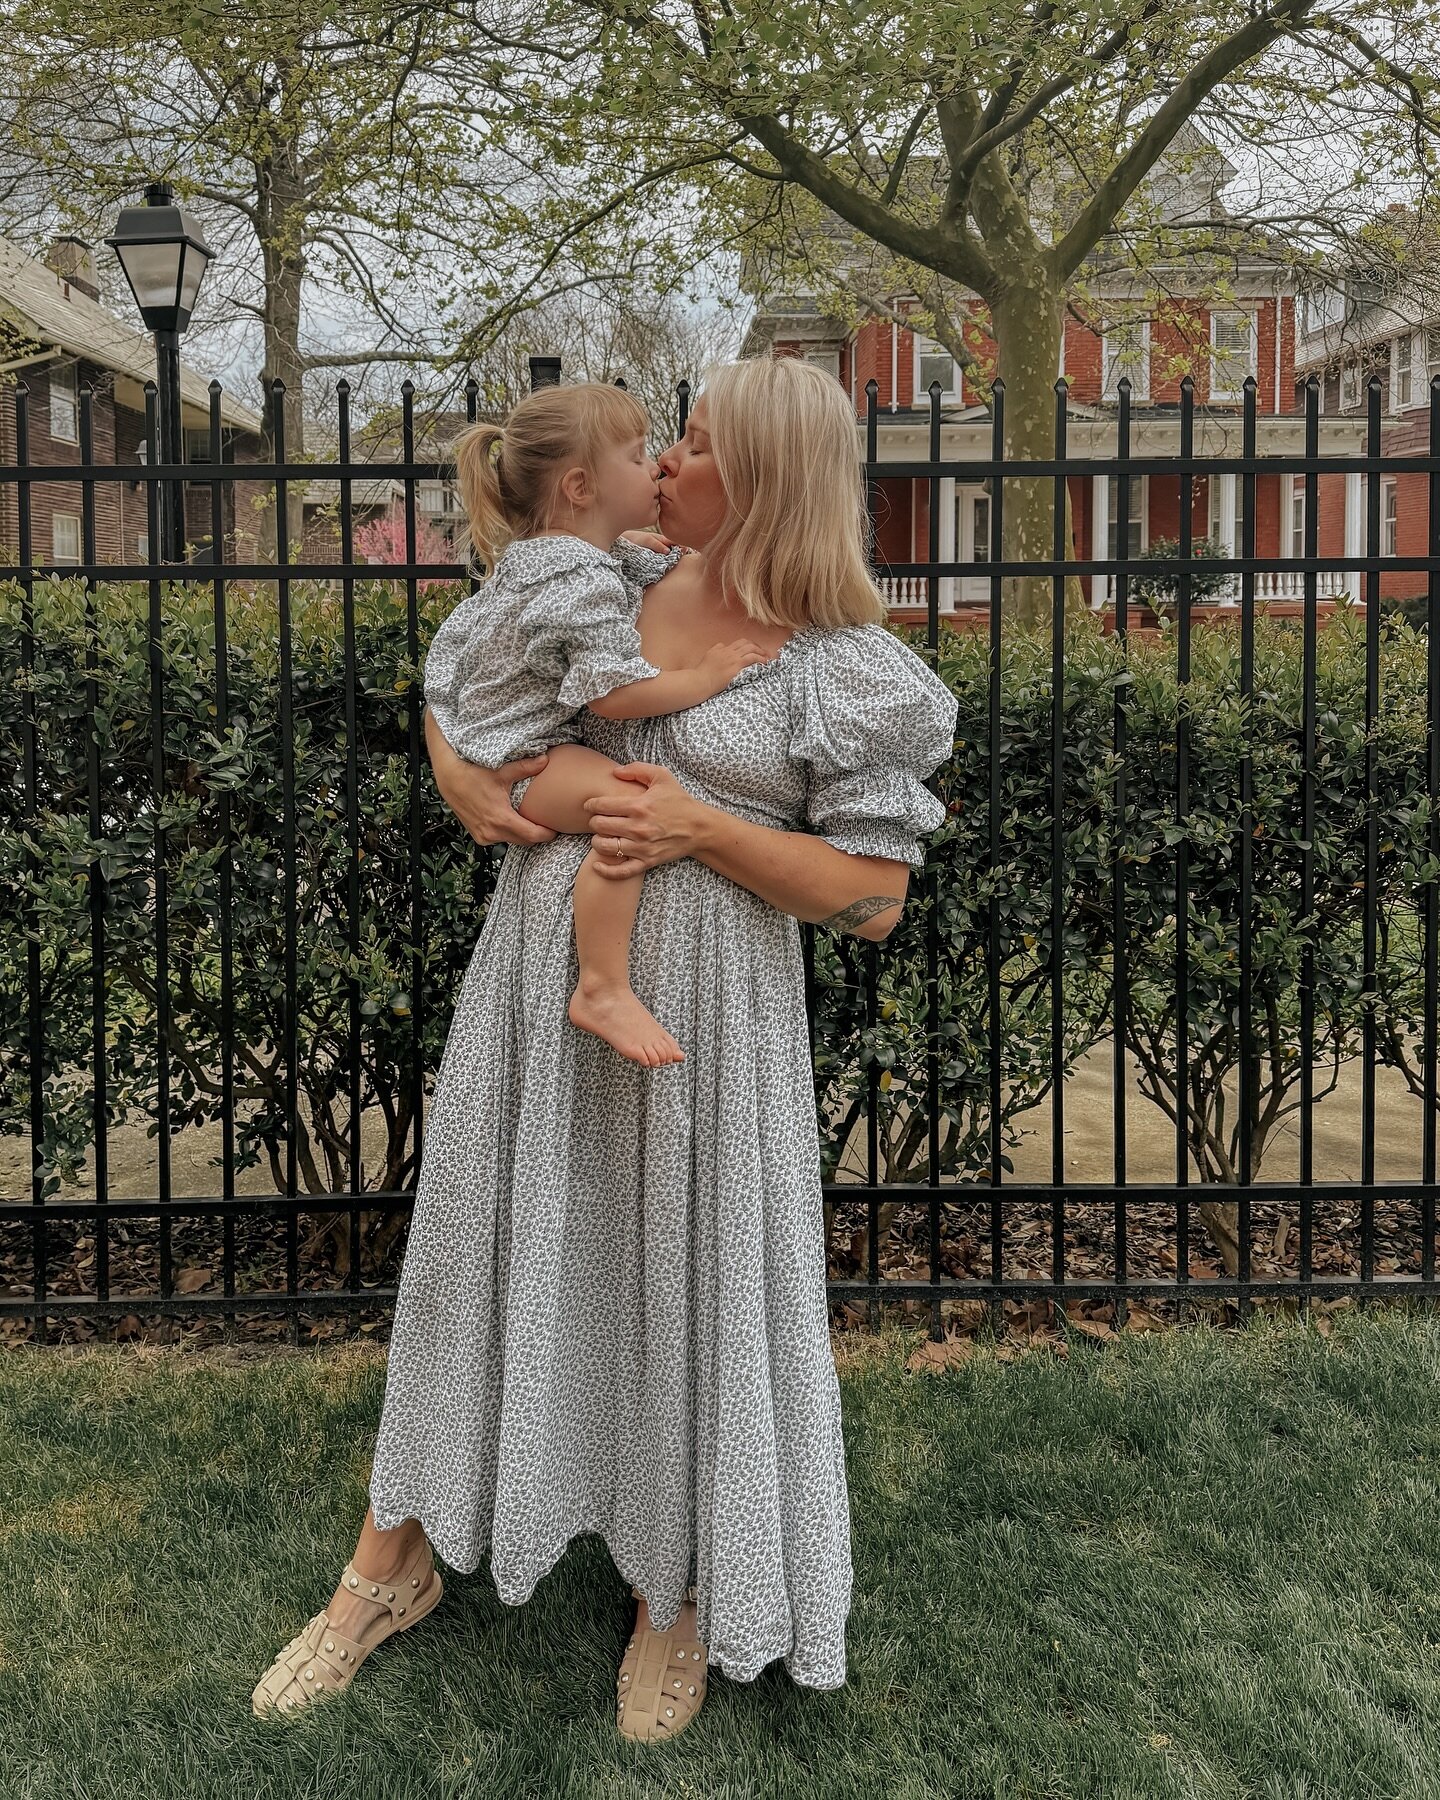 Happy belated Easter! We had such a good weekend with family and friends. And I finally found an occasion to wear these matching dresses with my daughter 🥰

#fredasalvador #doen #vintagestyledress #vintagestyleclothing